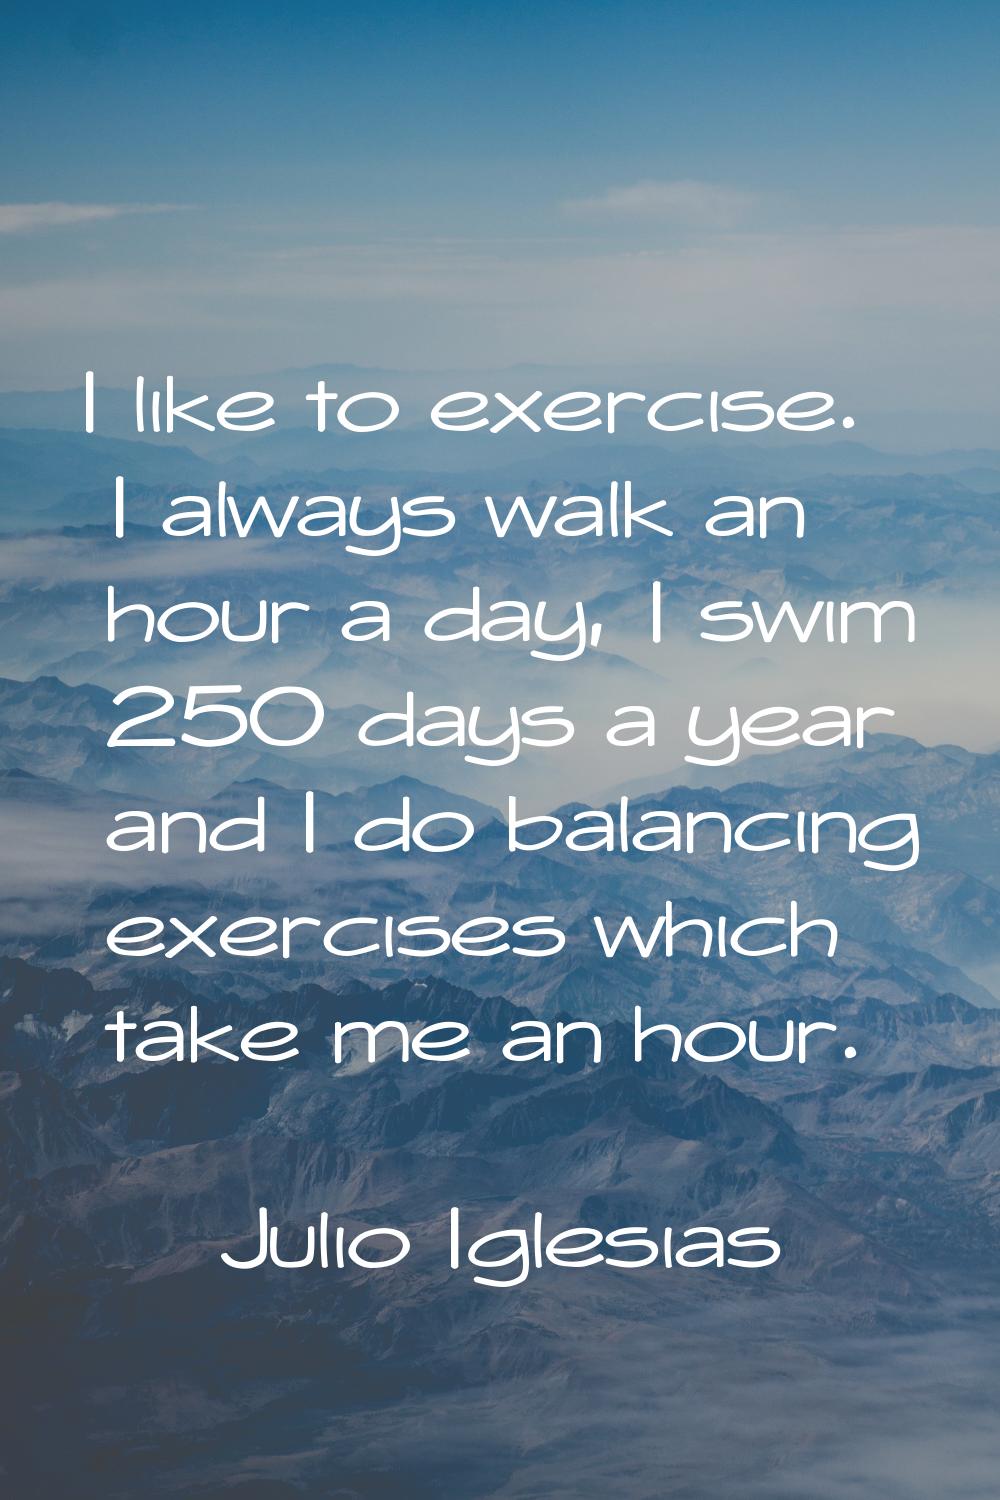 I like to exercise. I always walk an hour a day, I swim 250 days a year and I do balancing exercise